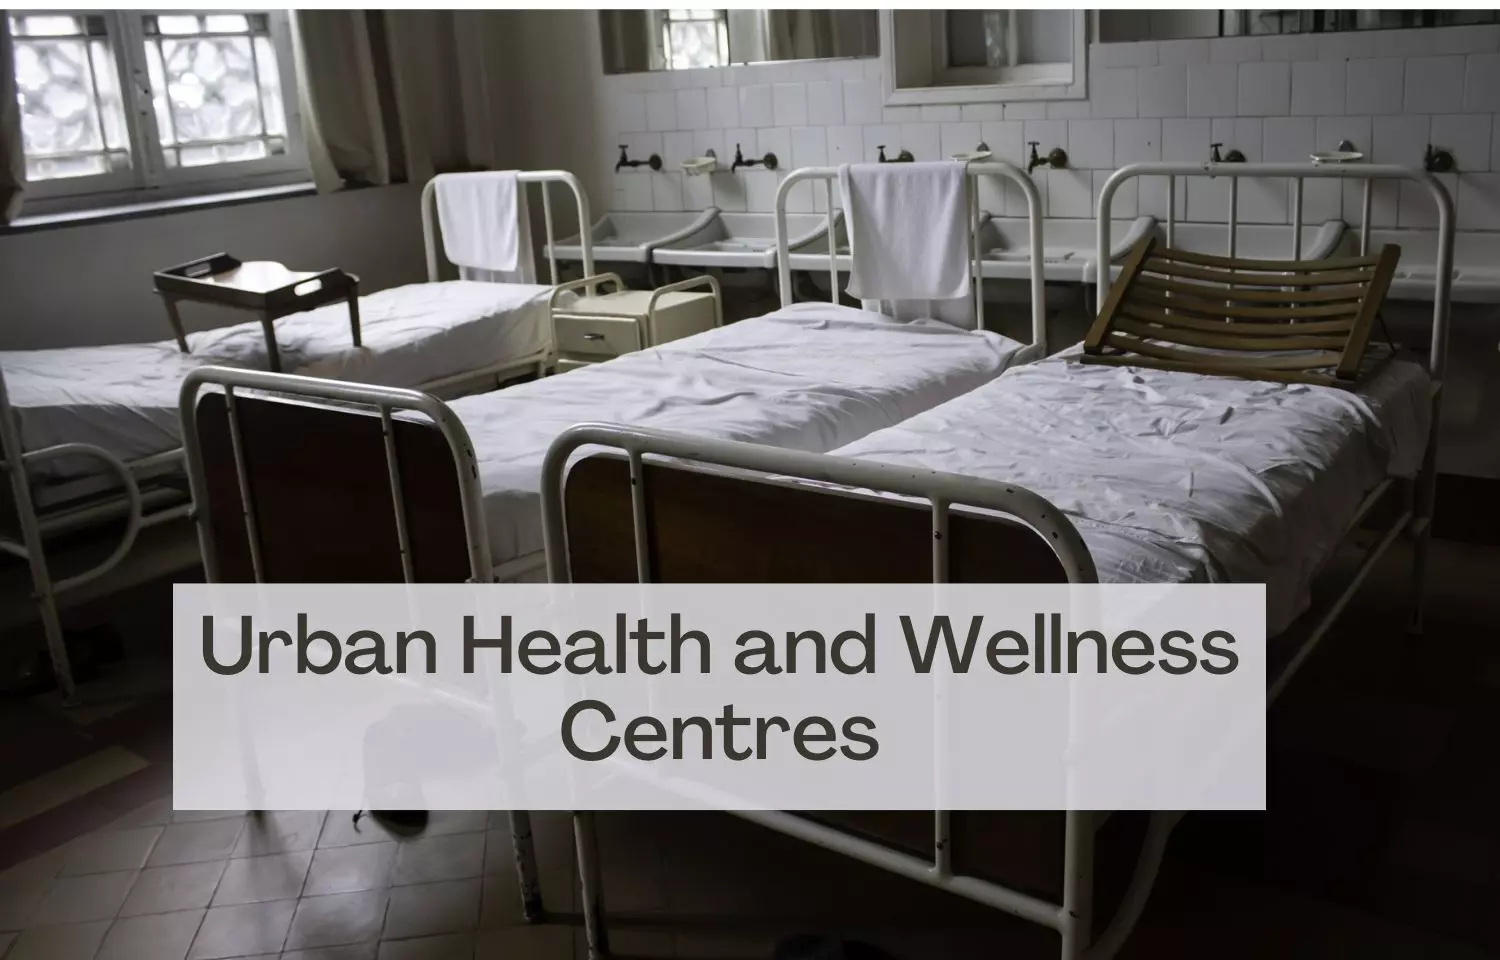 Chennai: Civic body to set up 140 urban health and wellness centres at cost of Rs 88 crore